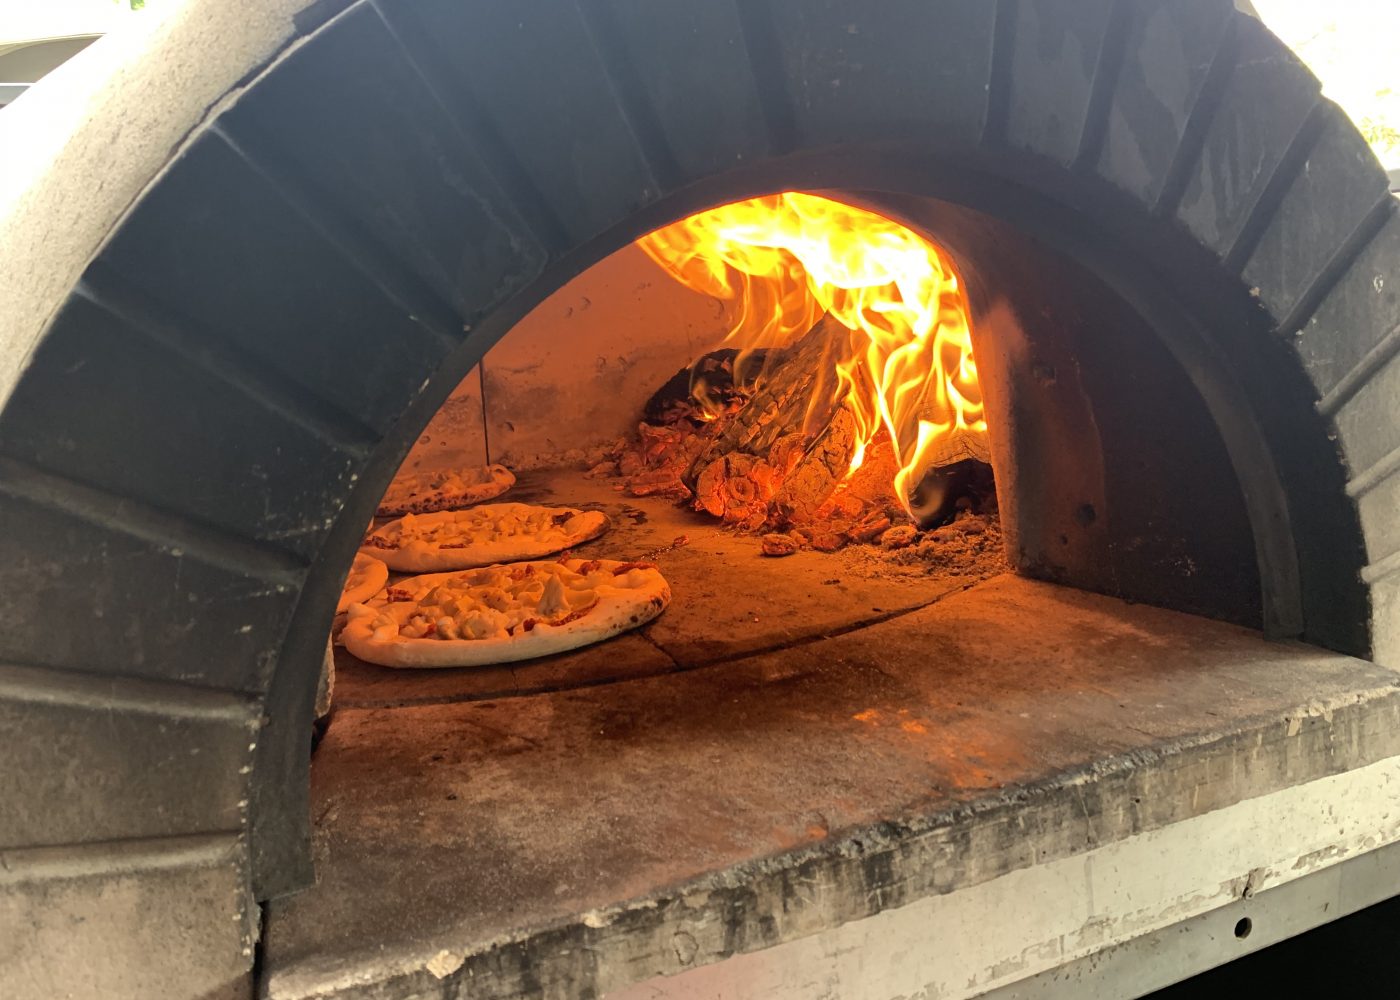 Mobile Woodfire Pizza Catering - Pizzeria On The Road